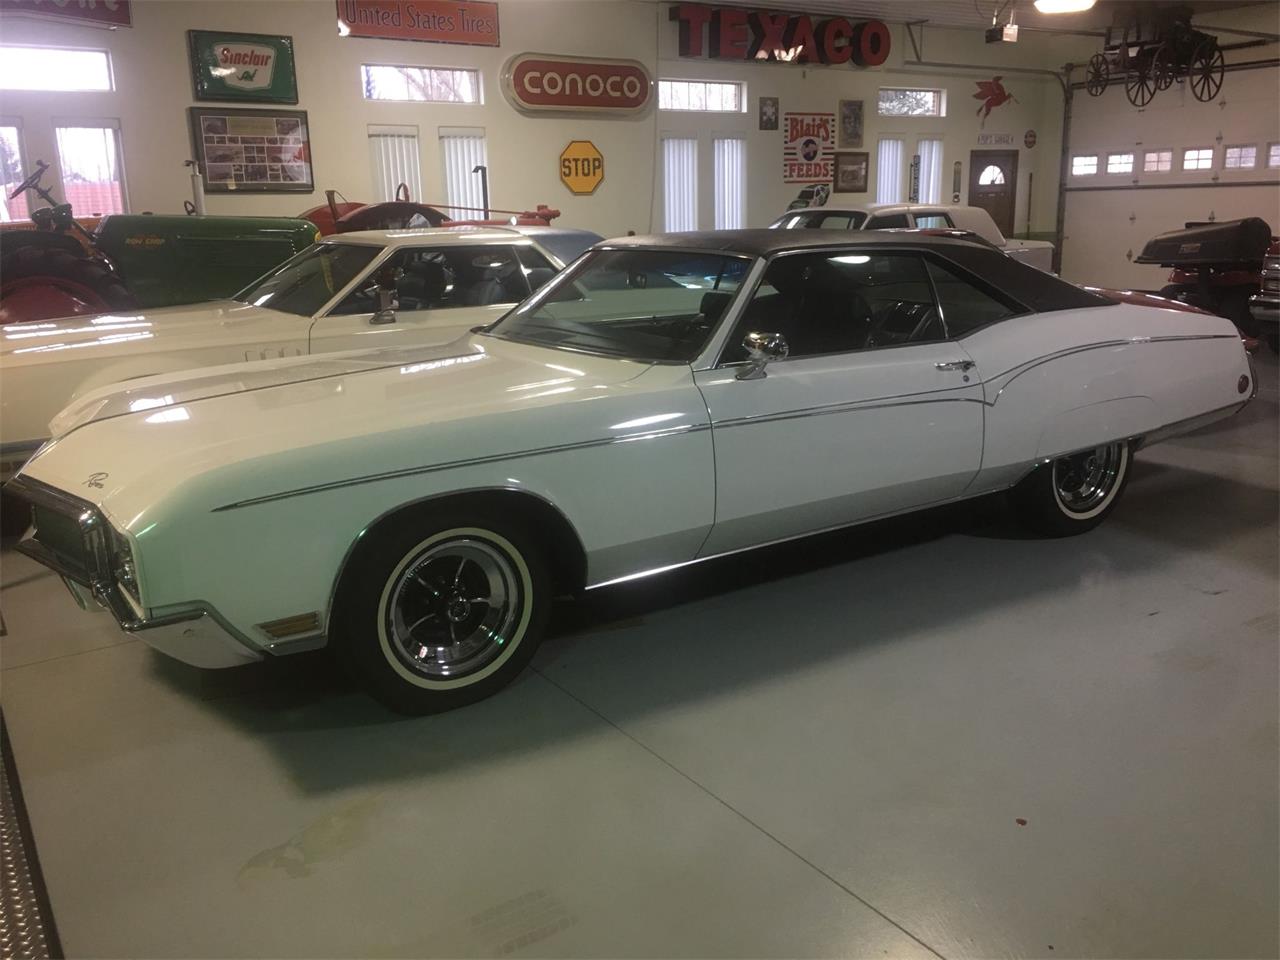 1970 buick riviera for sale in annandale mn classiccarsbay com 1970 buick riviera for sale in